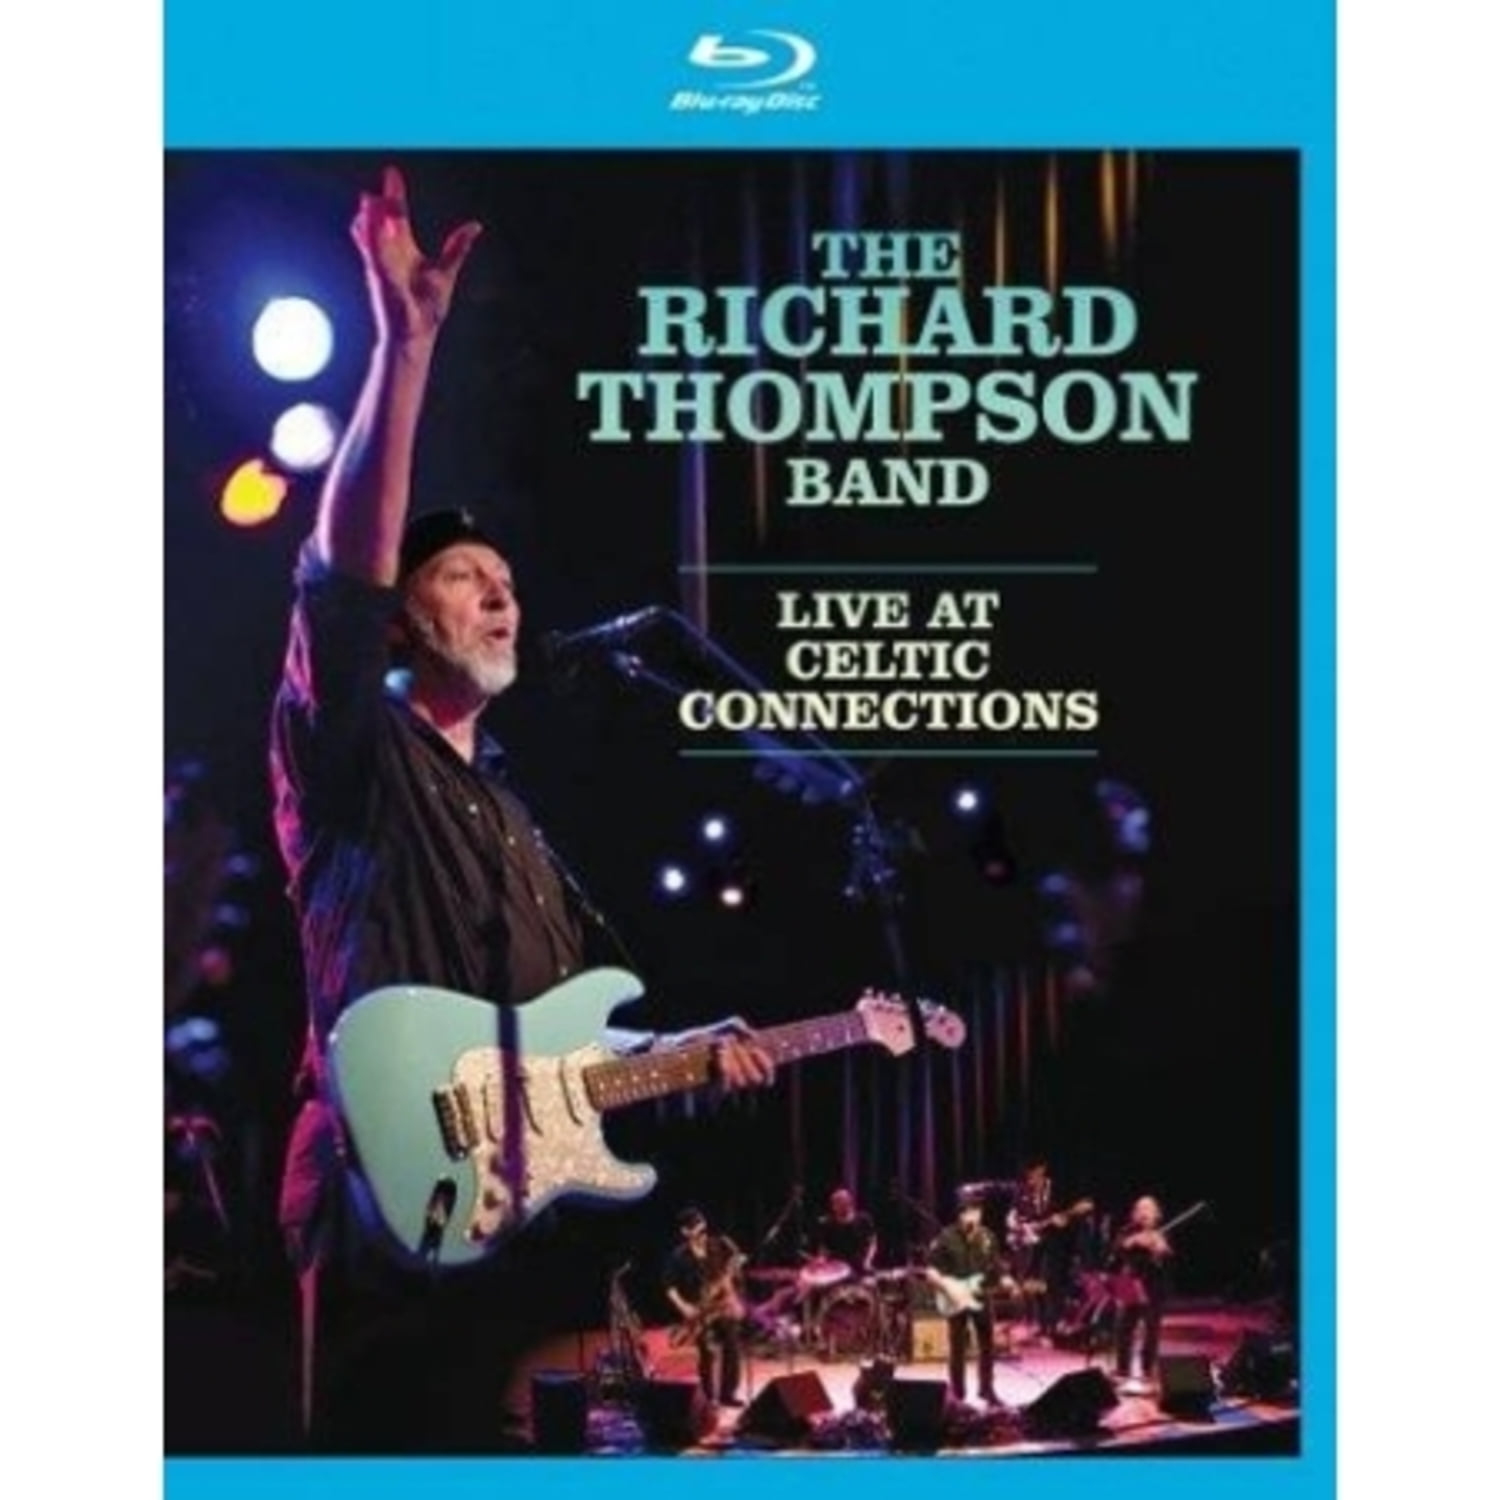 THE RICHARD THOMPSON BAND - LIVE AT CELTIC CONNECTIONS (1 DISC)